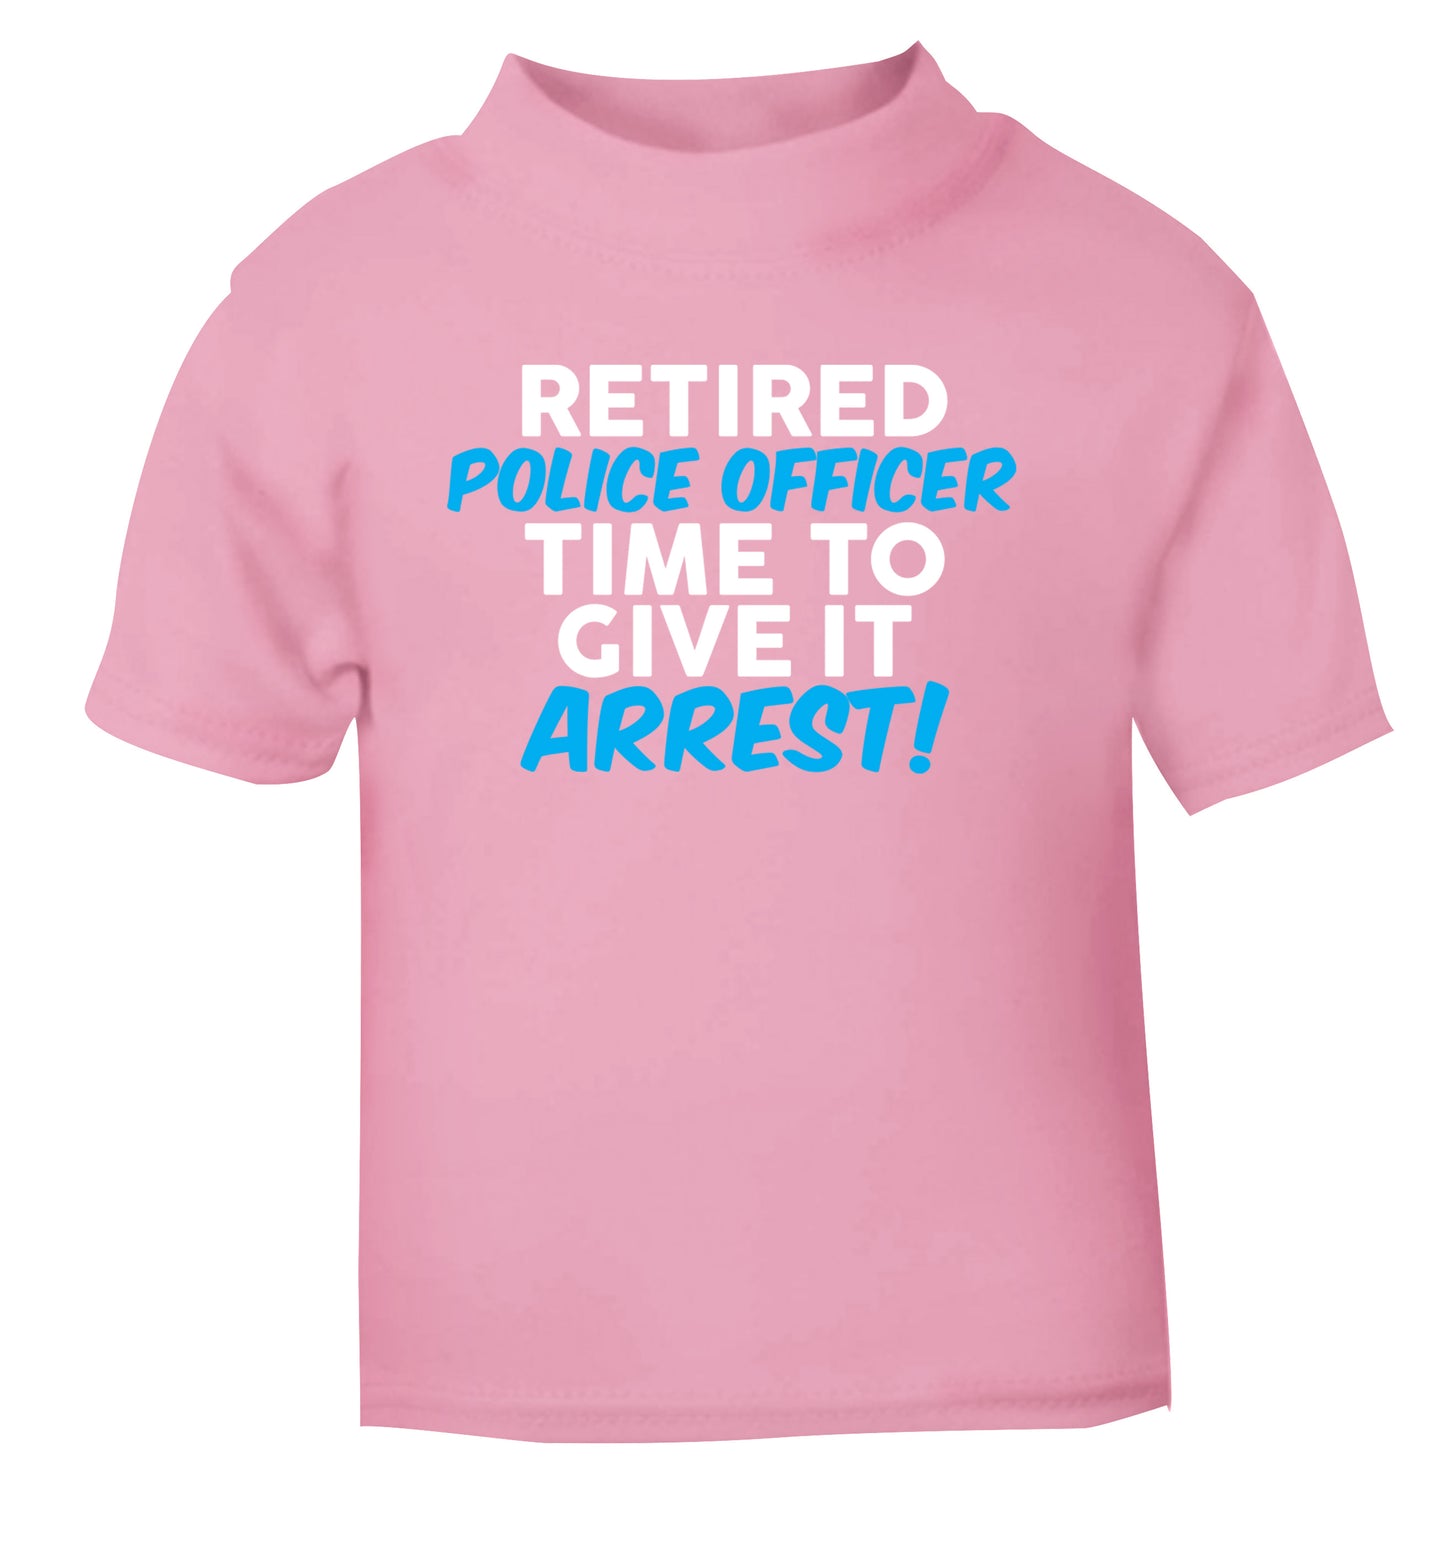 Retired police officer time to give it arrest light pink Baby Toddler Tshirt 2 Years